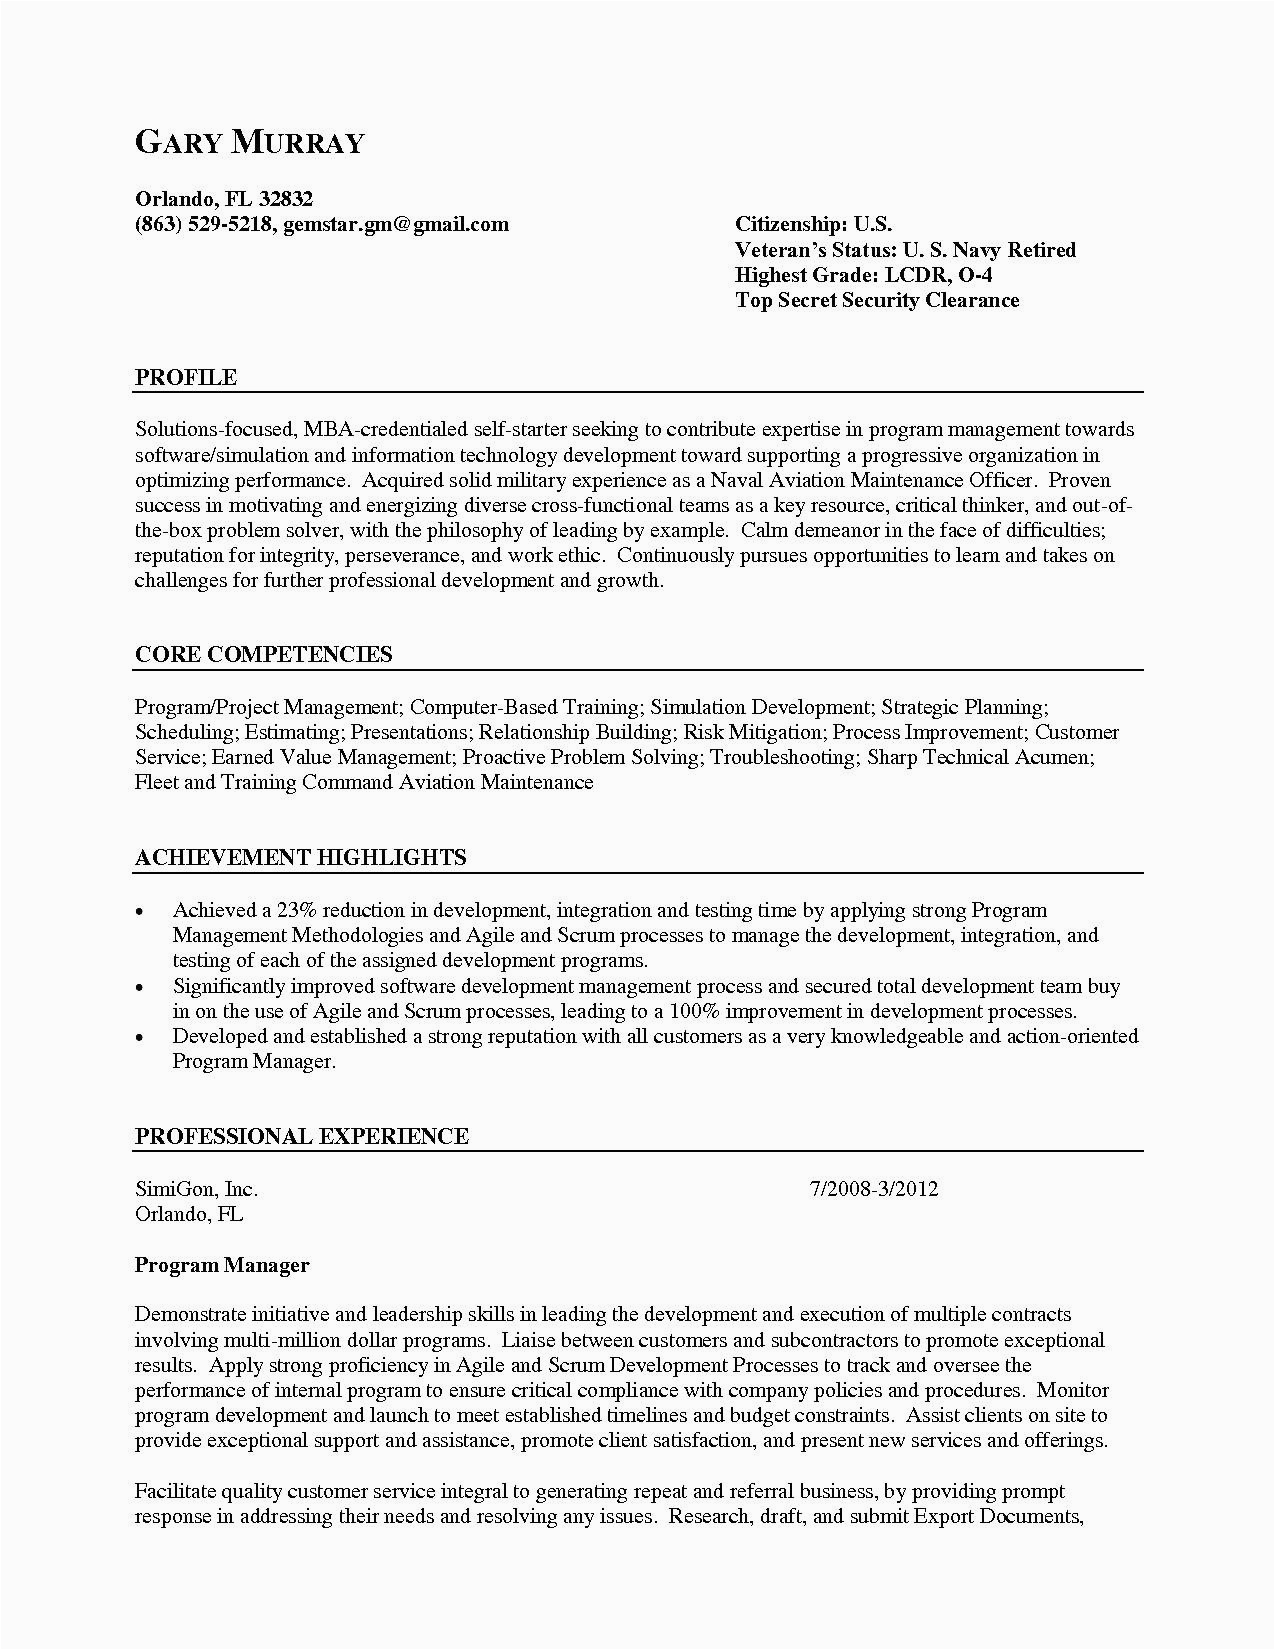 Sample Resume for A Retired Person 90 Fresh Sample Resume for Retired Person Returning to